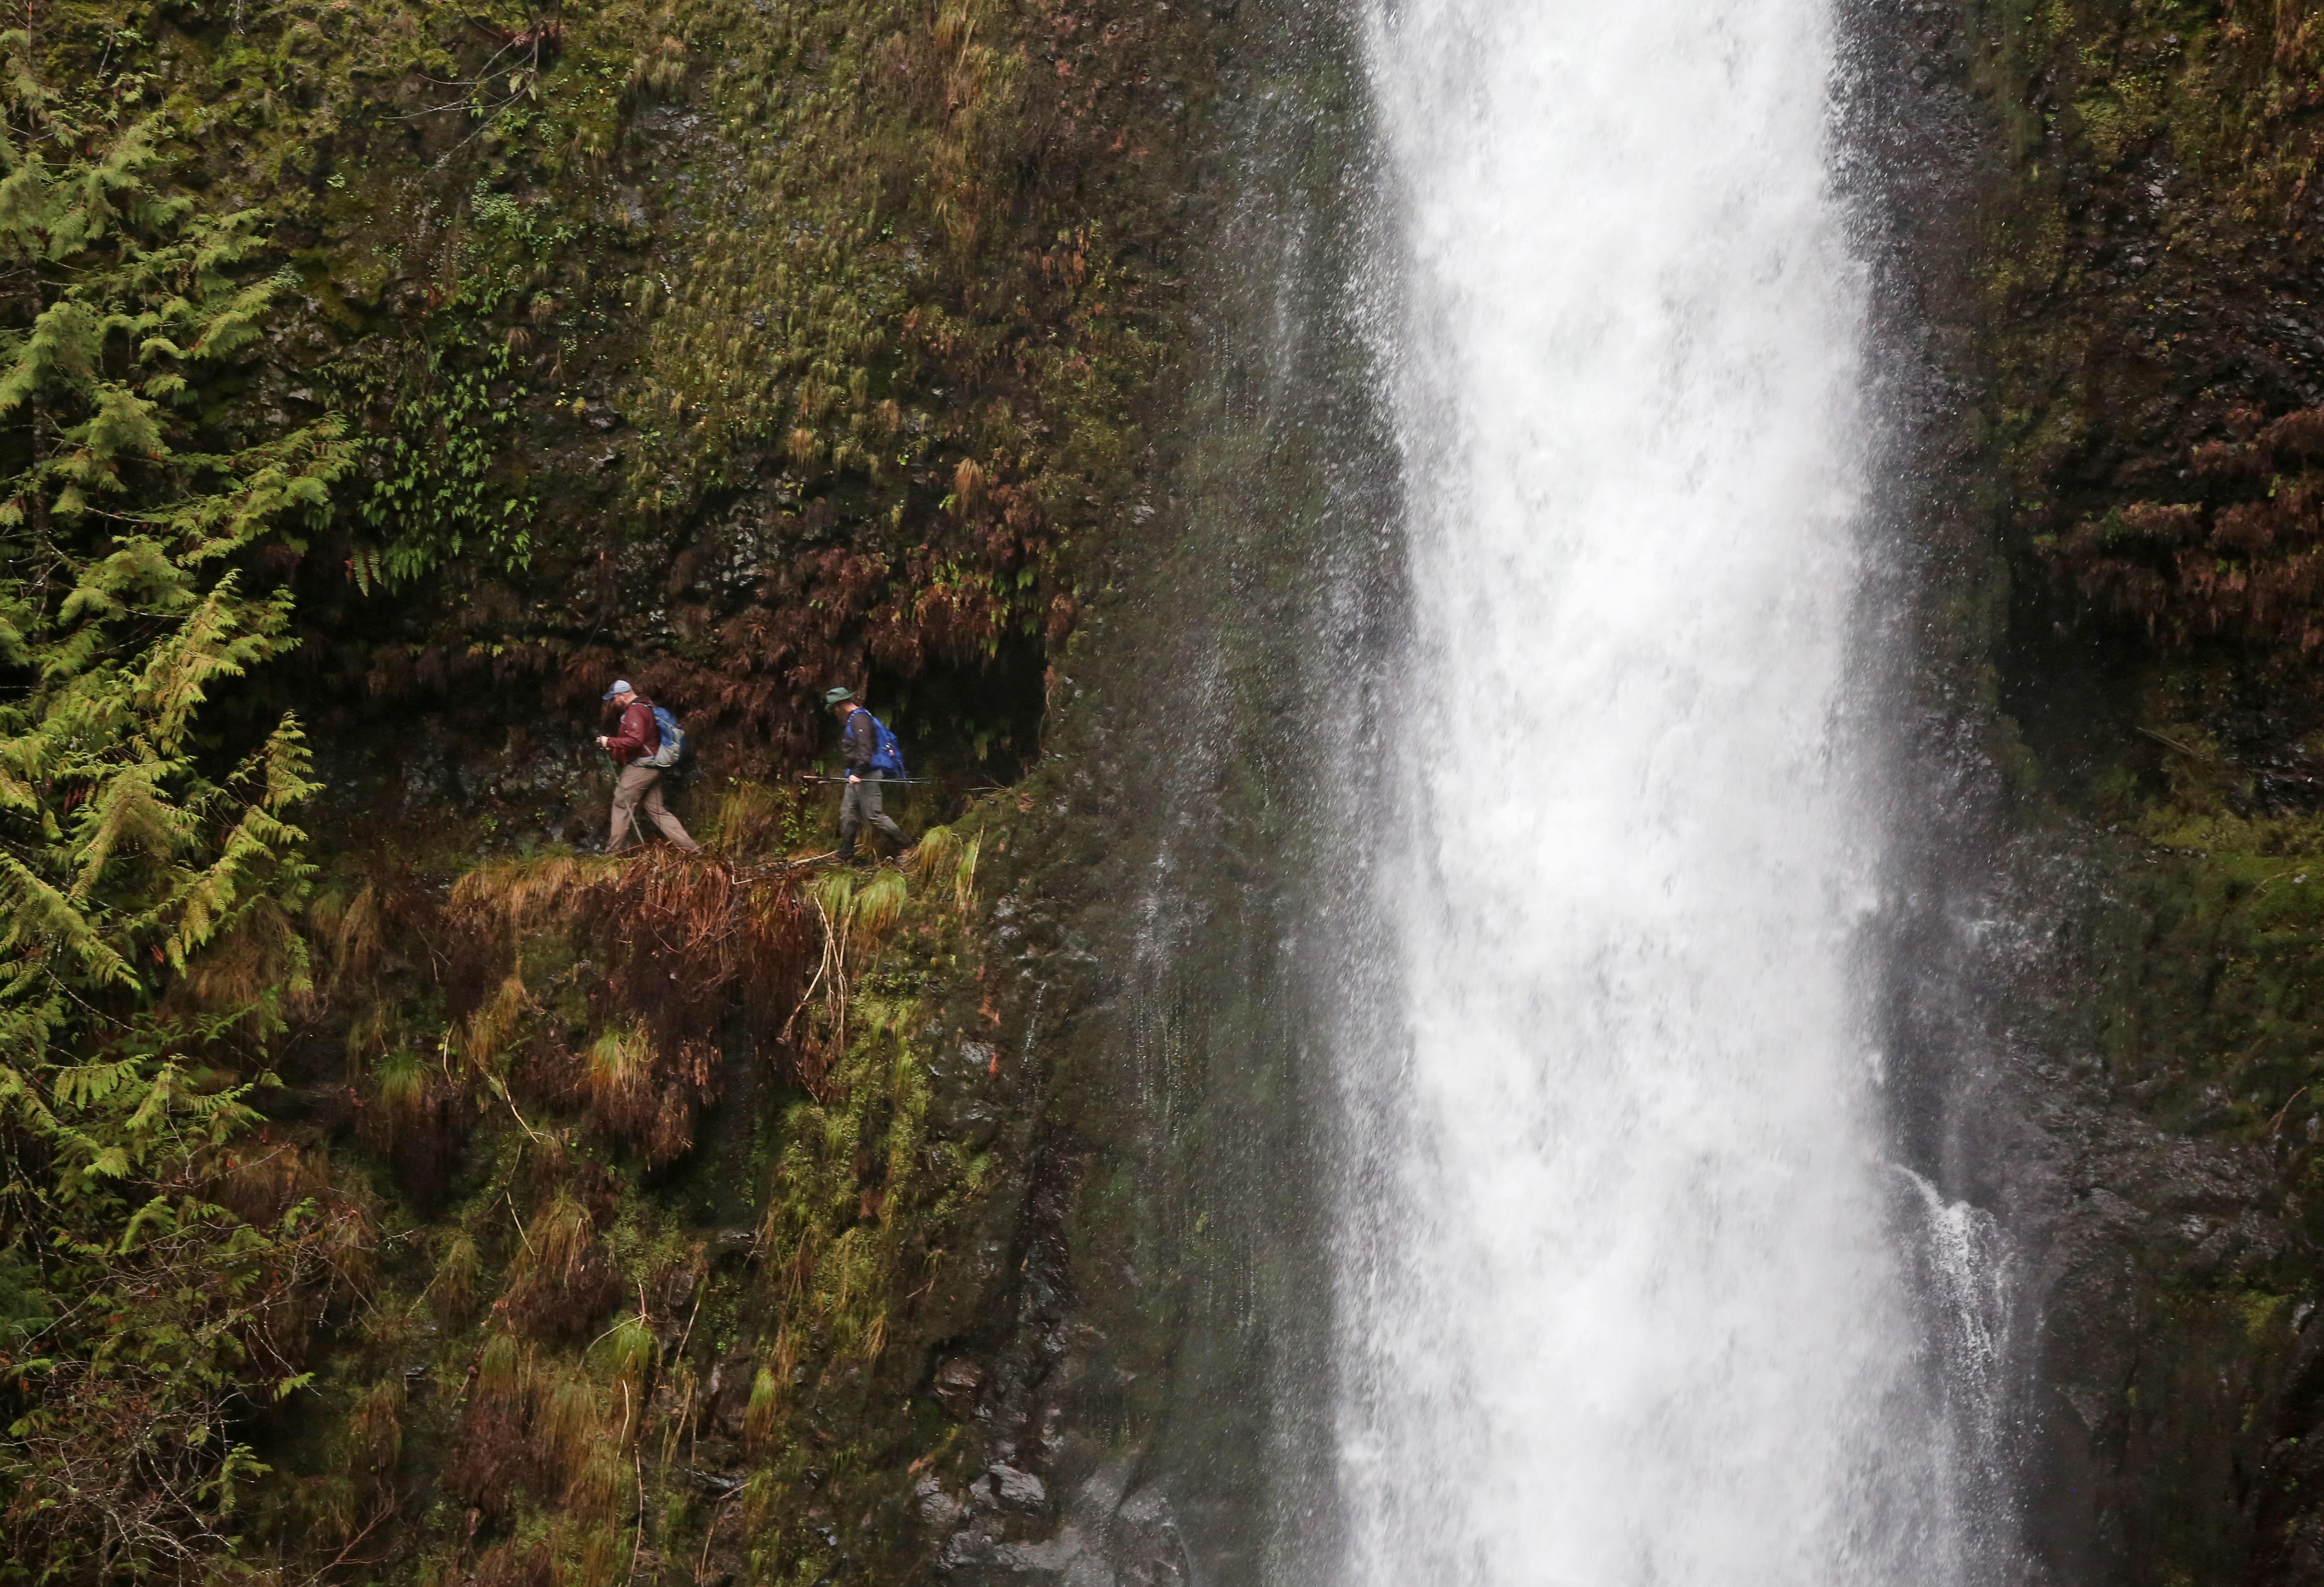 The Eagle Creek Trail Is The Best Of The Columbia River Gorge - Backpacker